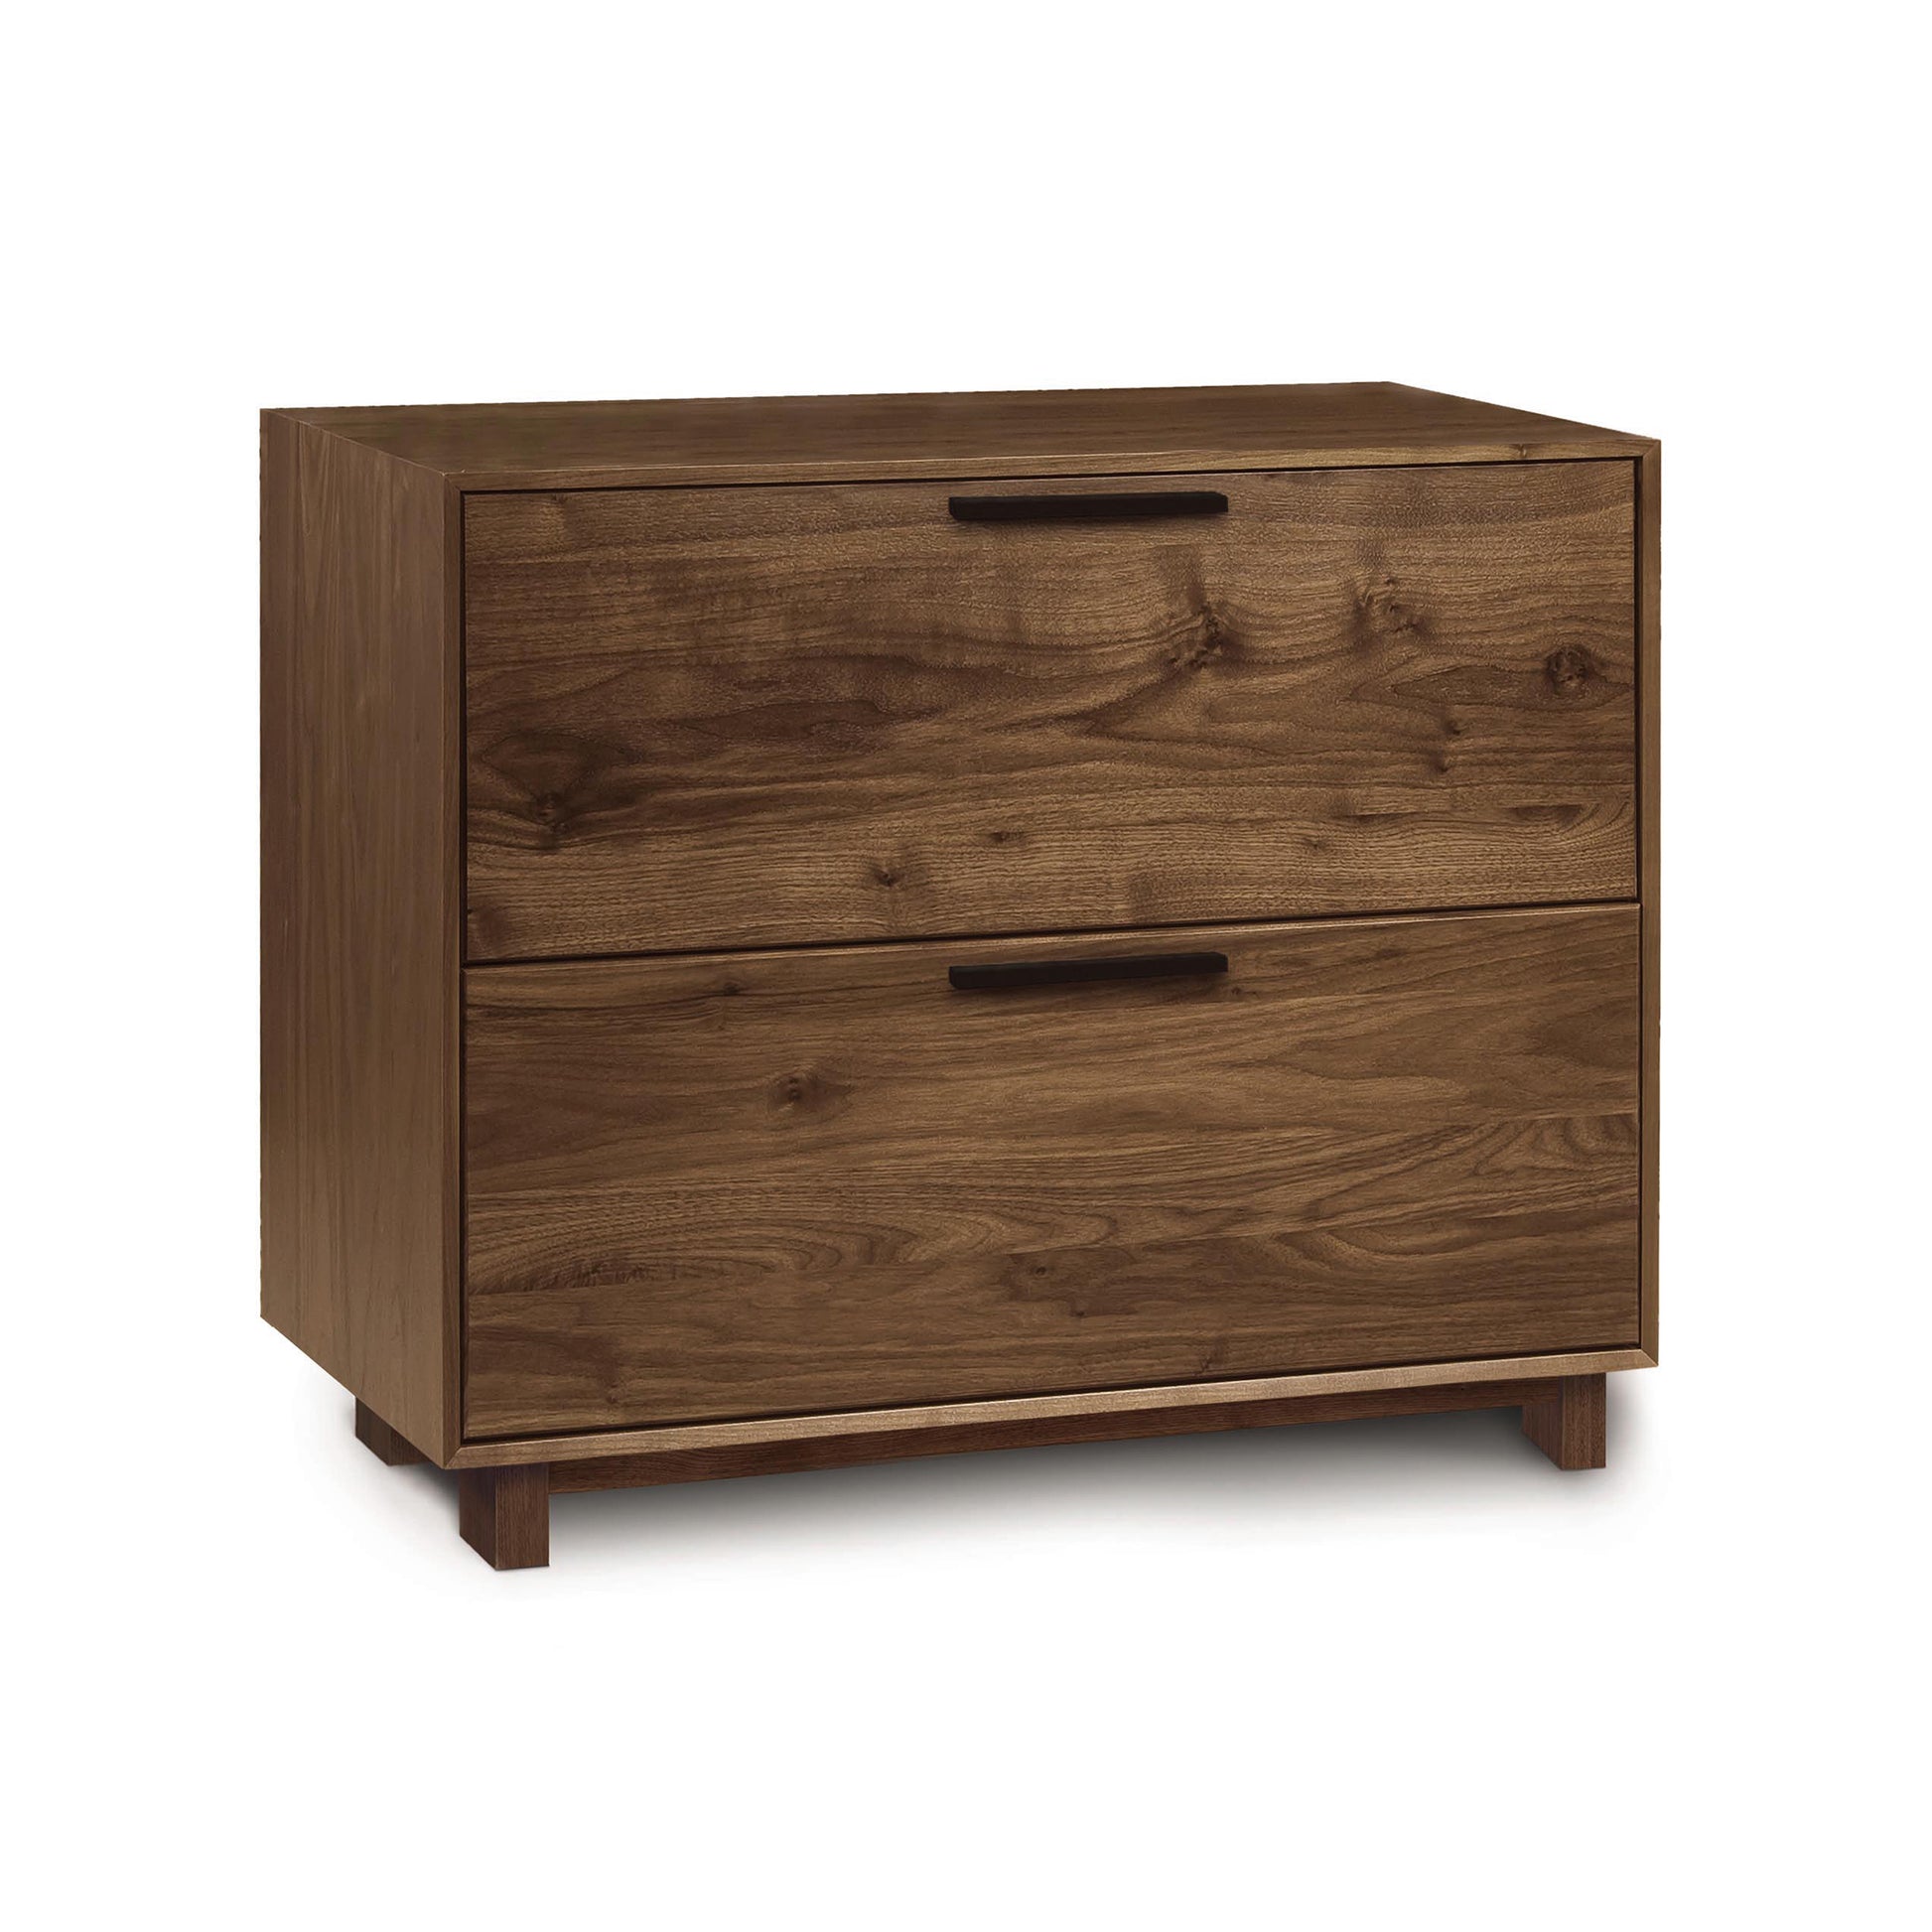 This image showcases a Copeland Furniture Linear Lateral File Cabinet, a sustainable hardwood two drawer file cabinet.